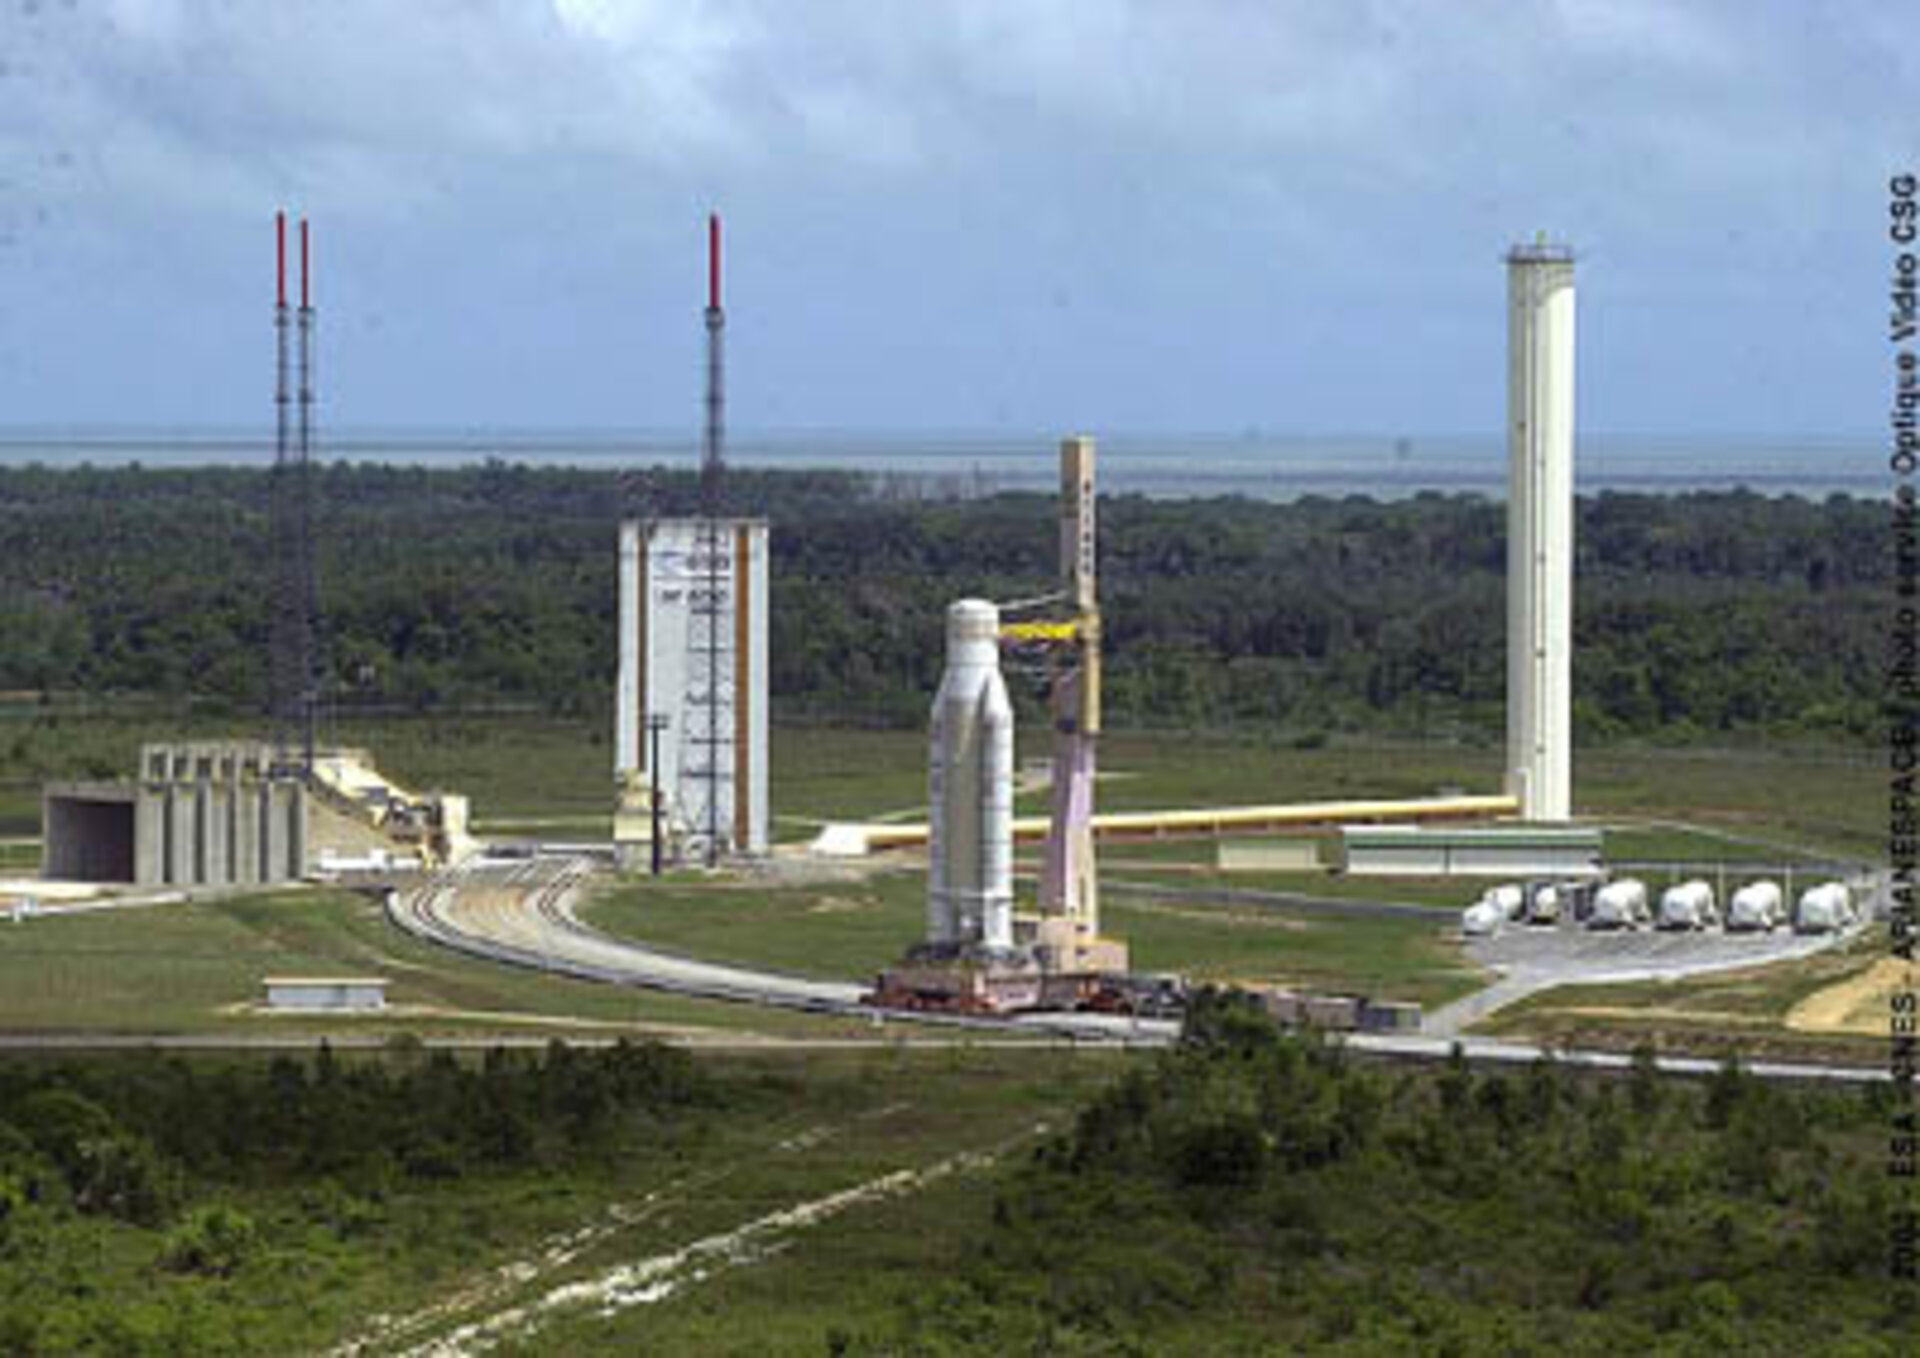 Flight 157 - Ariane 5 rolls out for launch pad tests